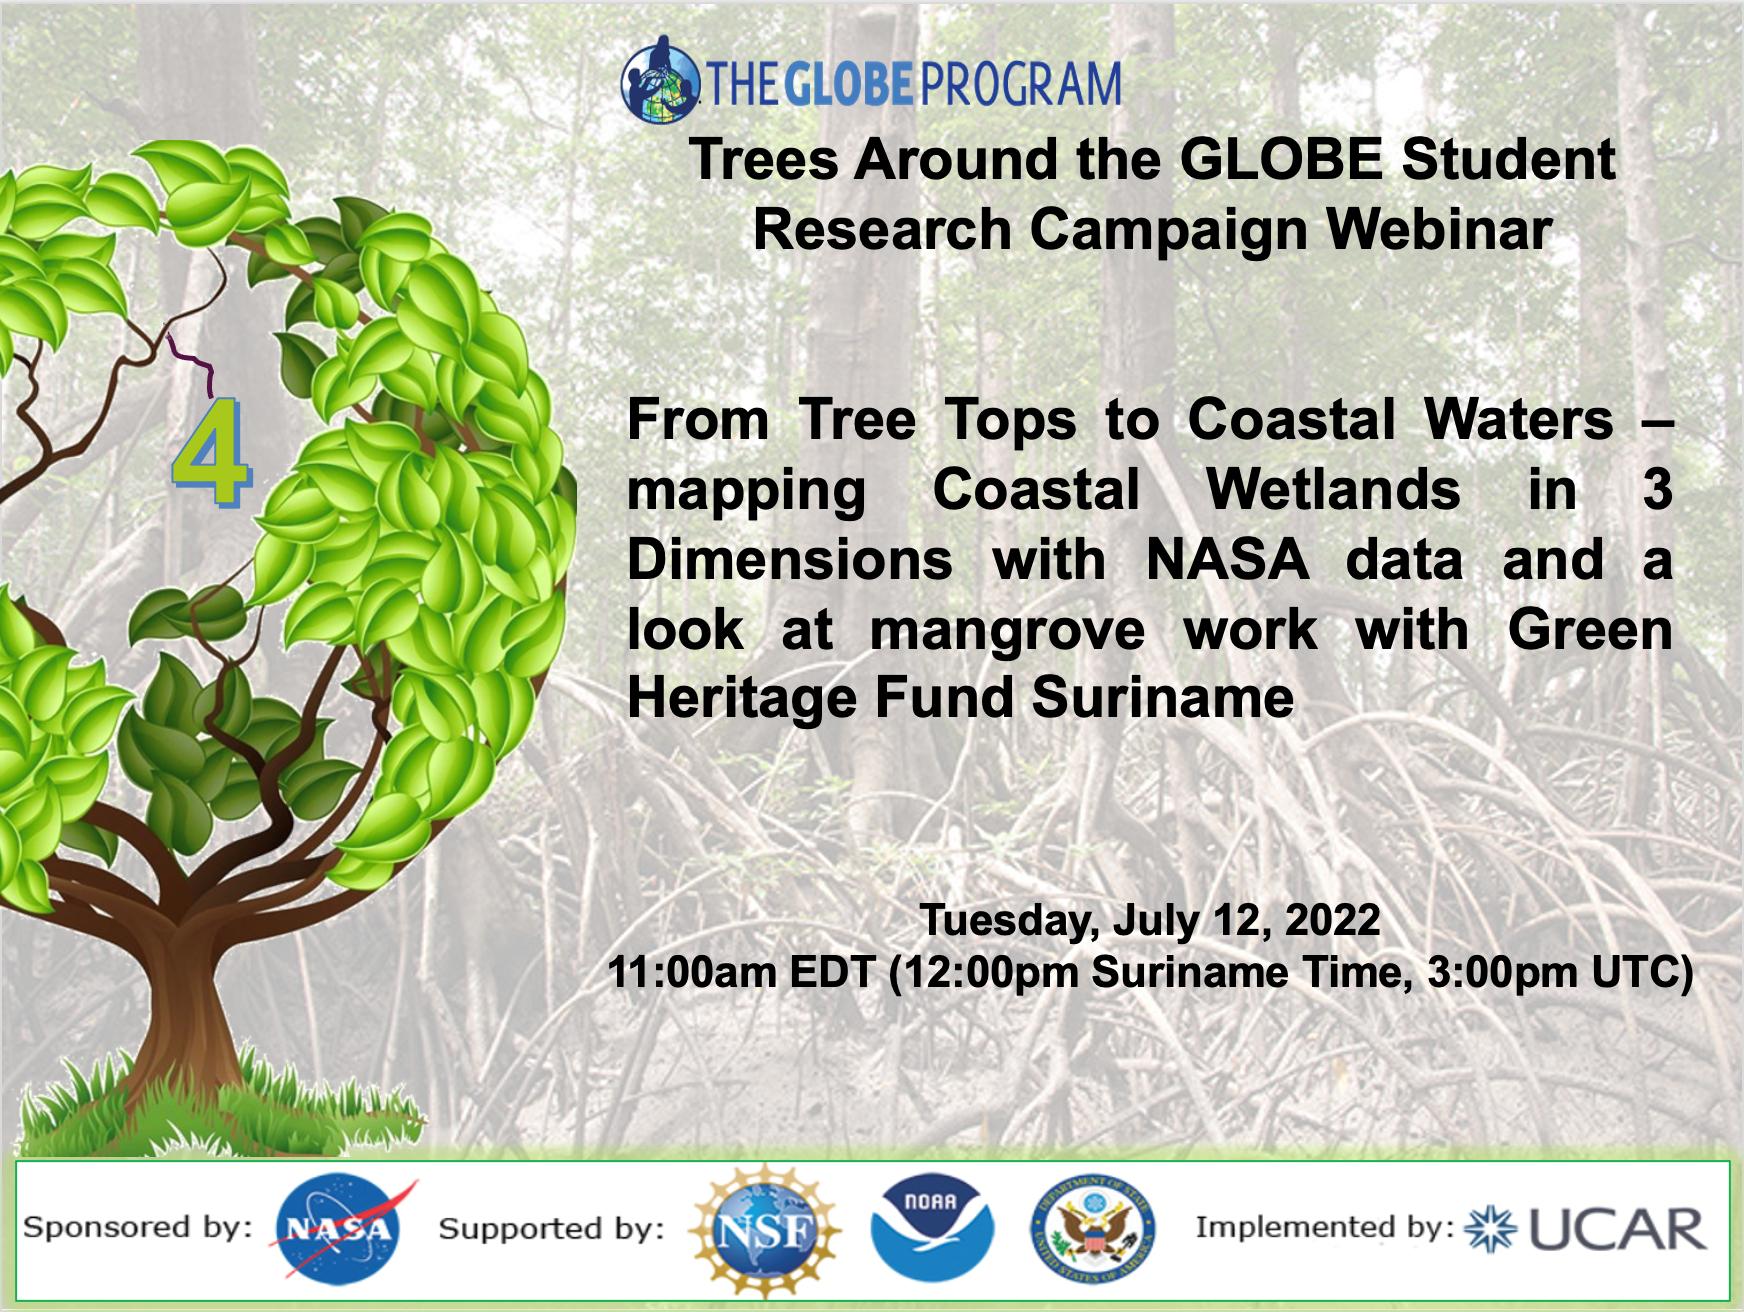 Trees Around the GLOBE Student Research Campaign 12 July webinar shareable, showing the title, time and date of the event